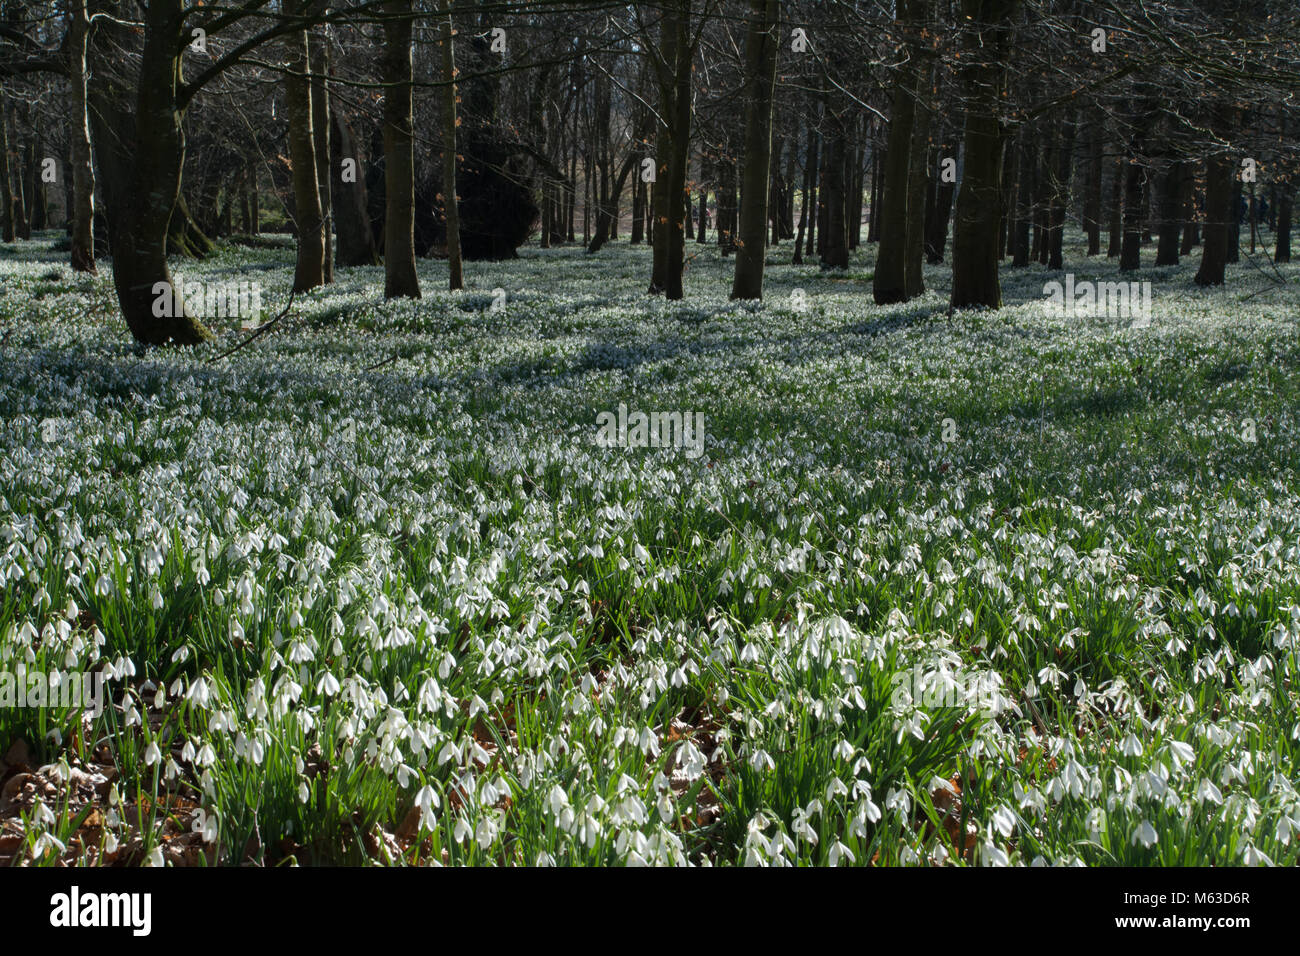 Beech woodlands covered with snowdrops in February at Welford Park, Berkshire, UK Stock Photo